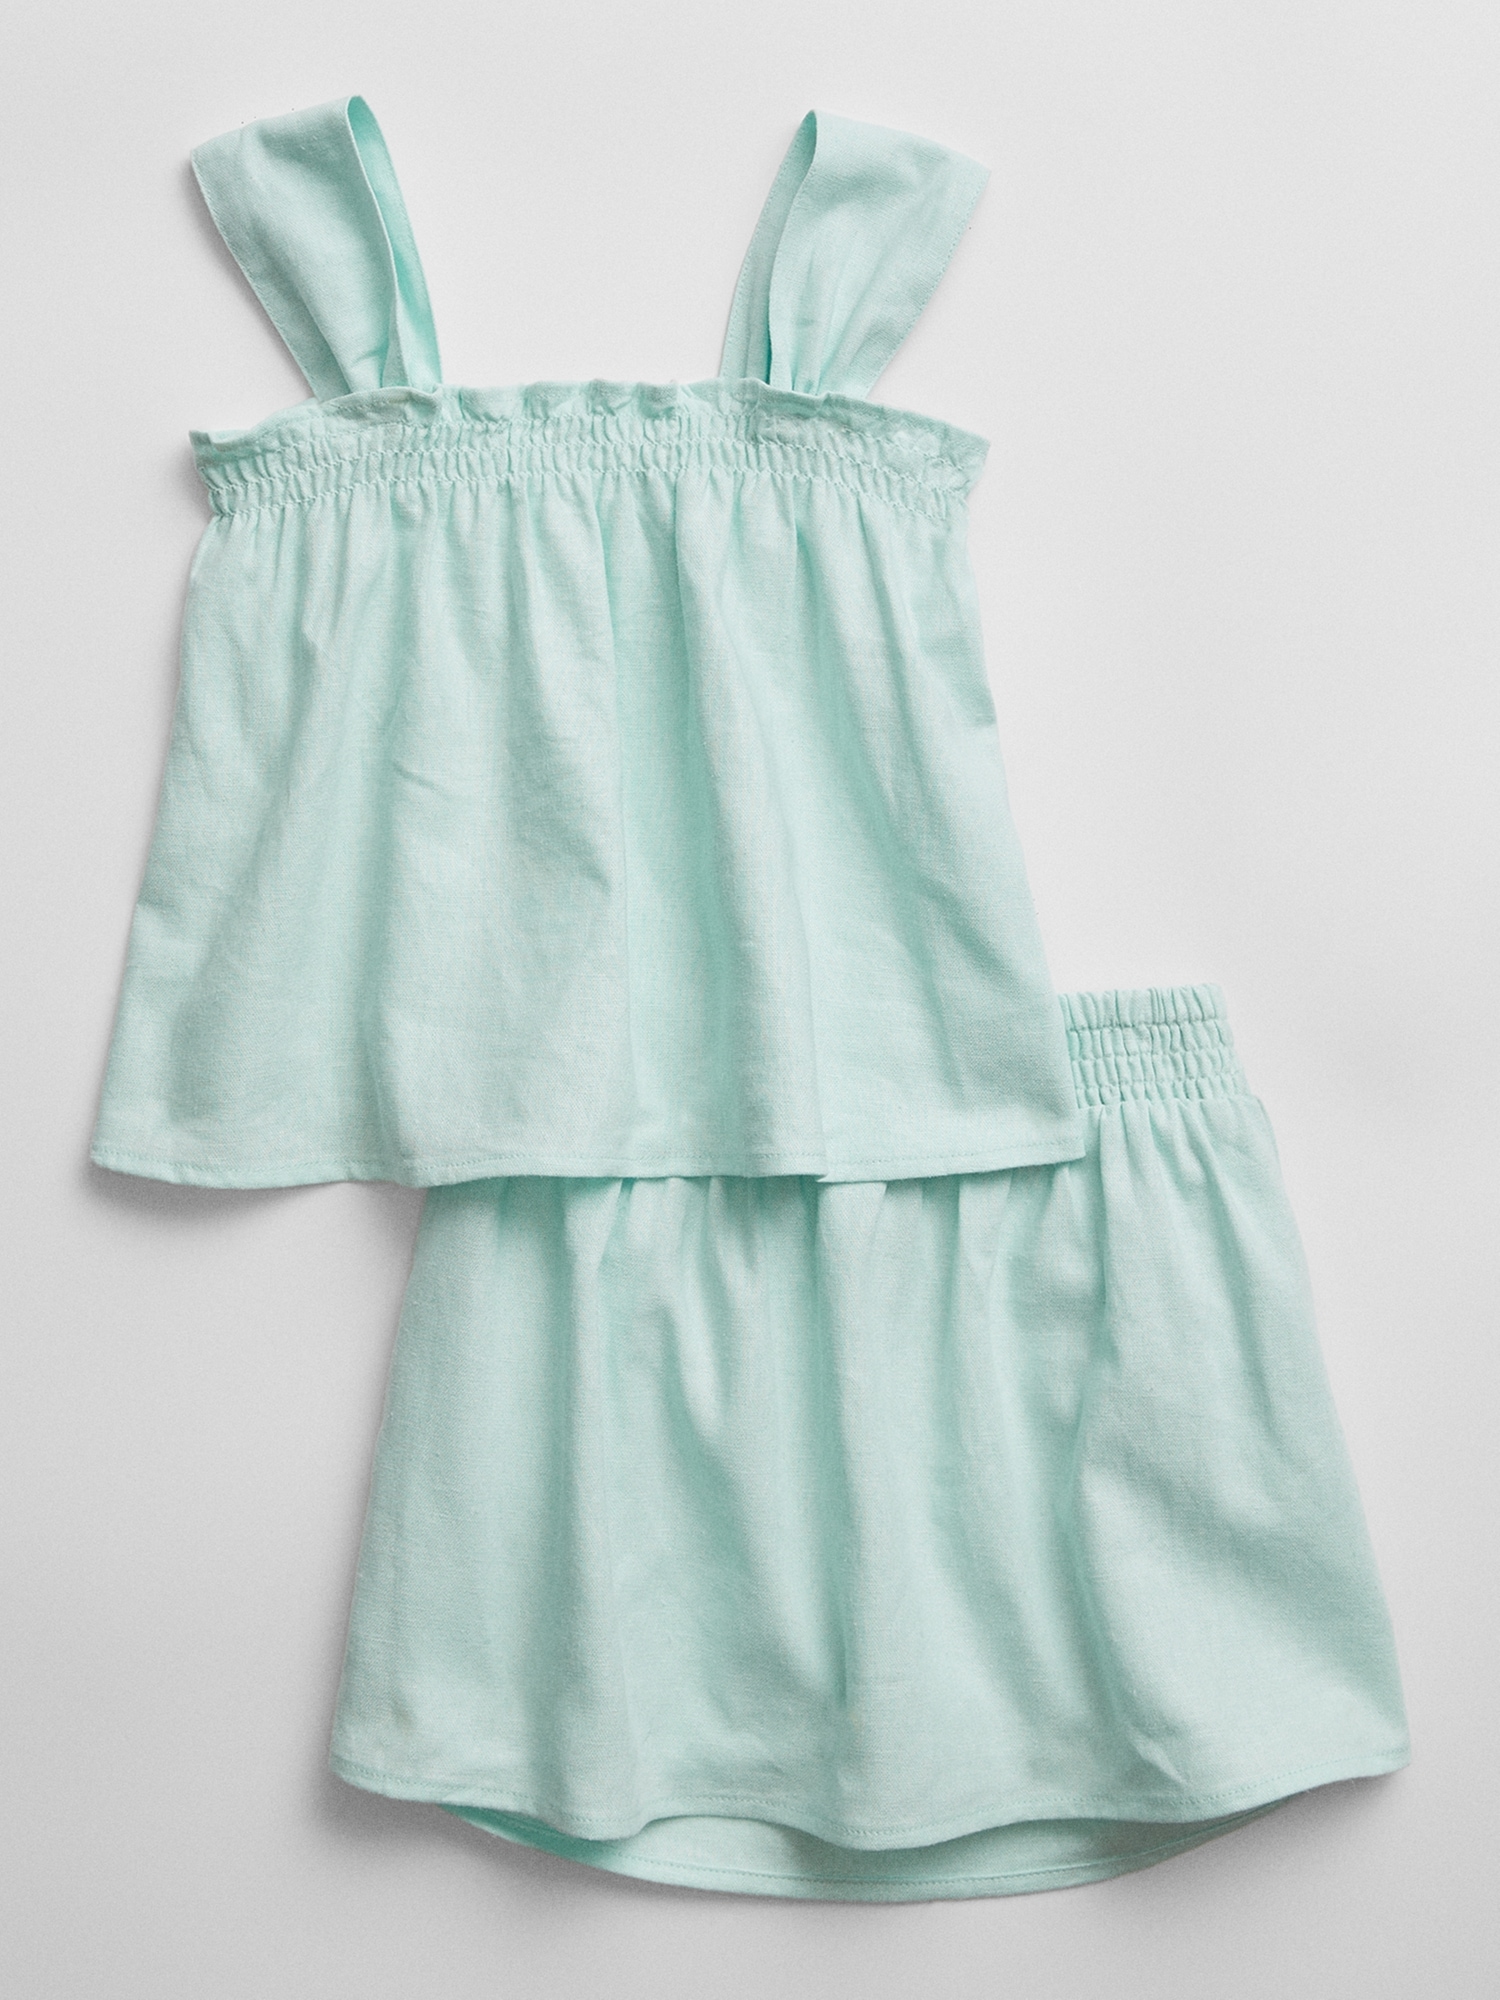 babyGap Two-Piece Skirt Outfit Set